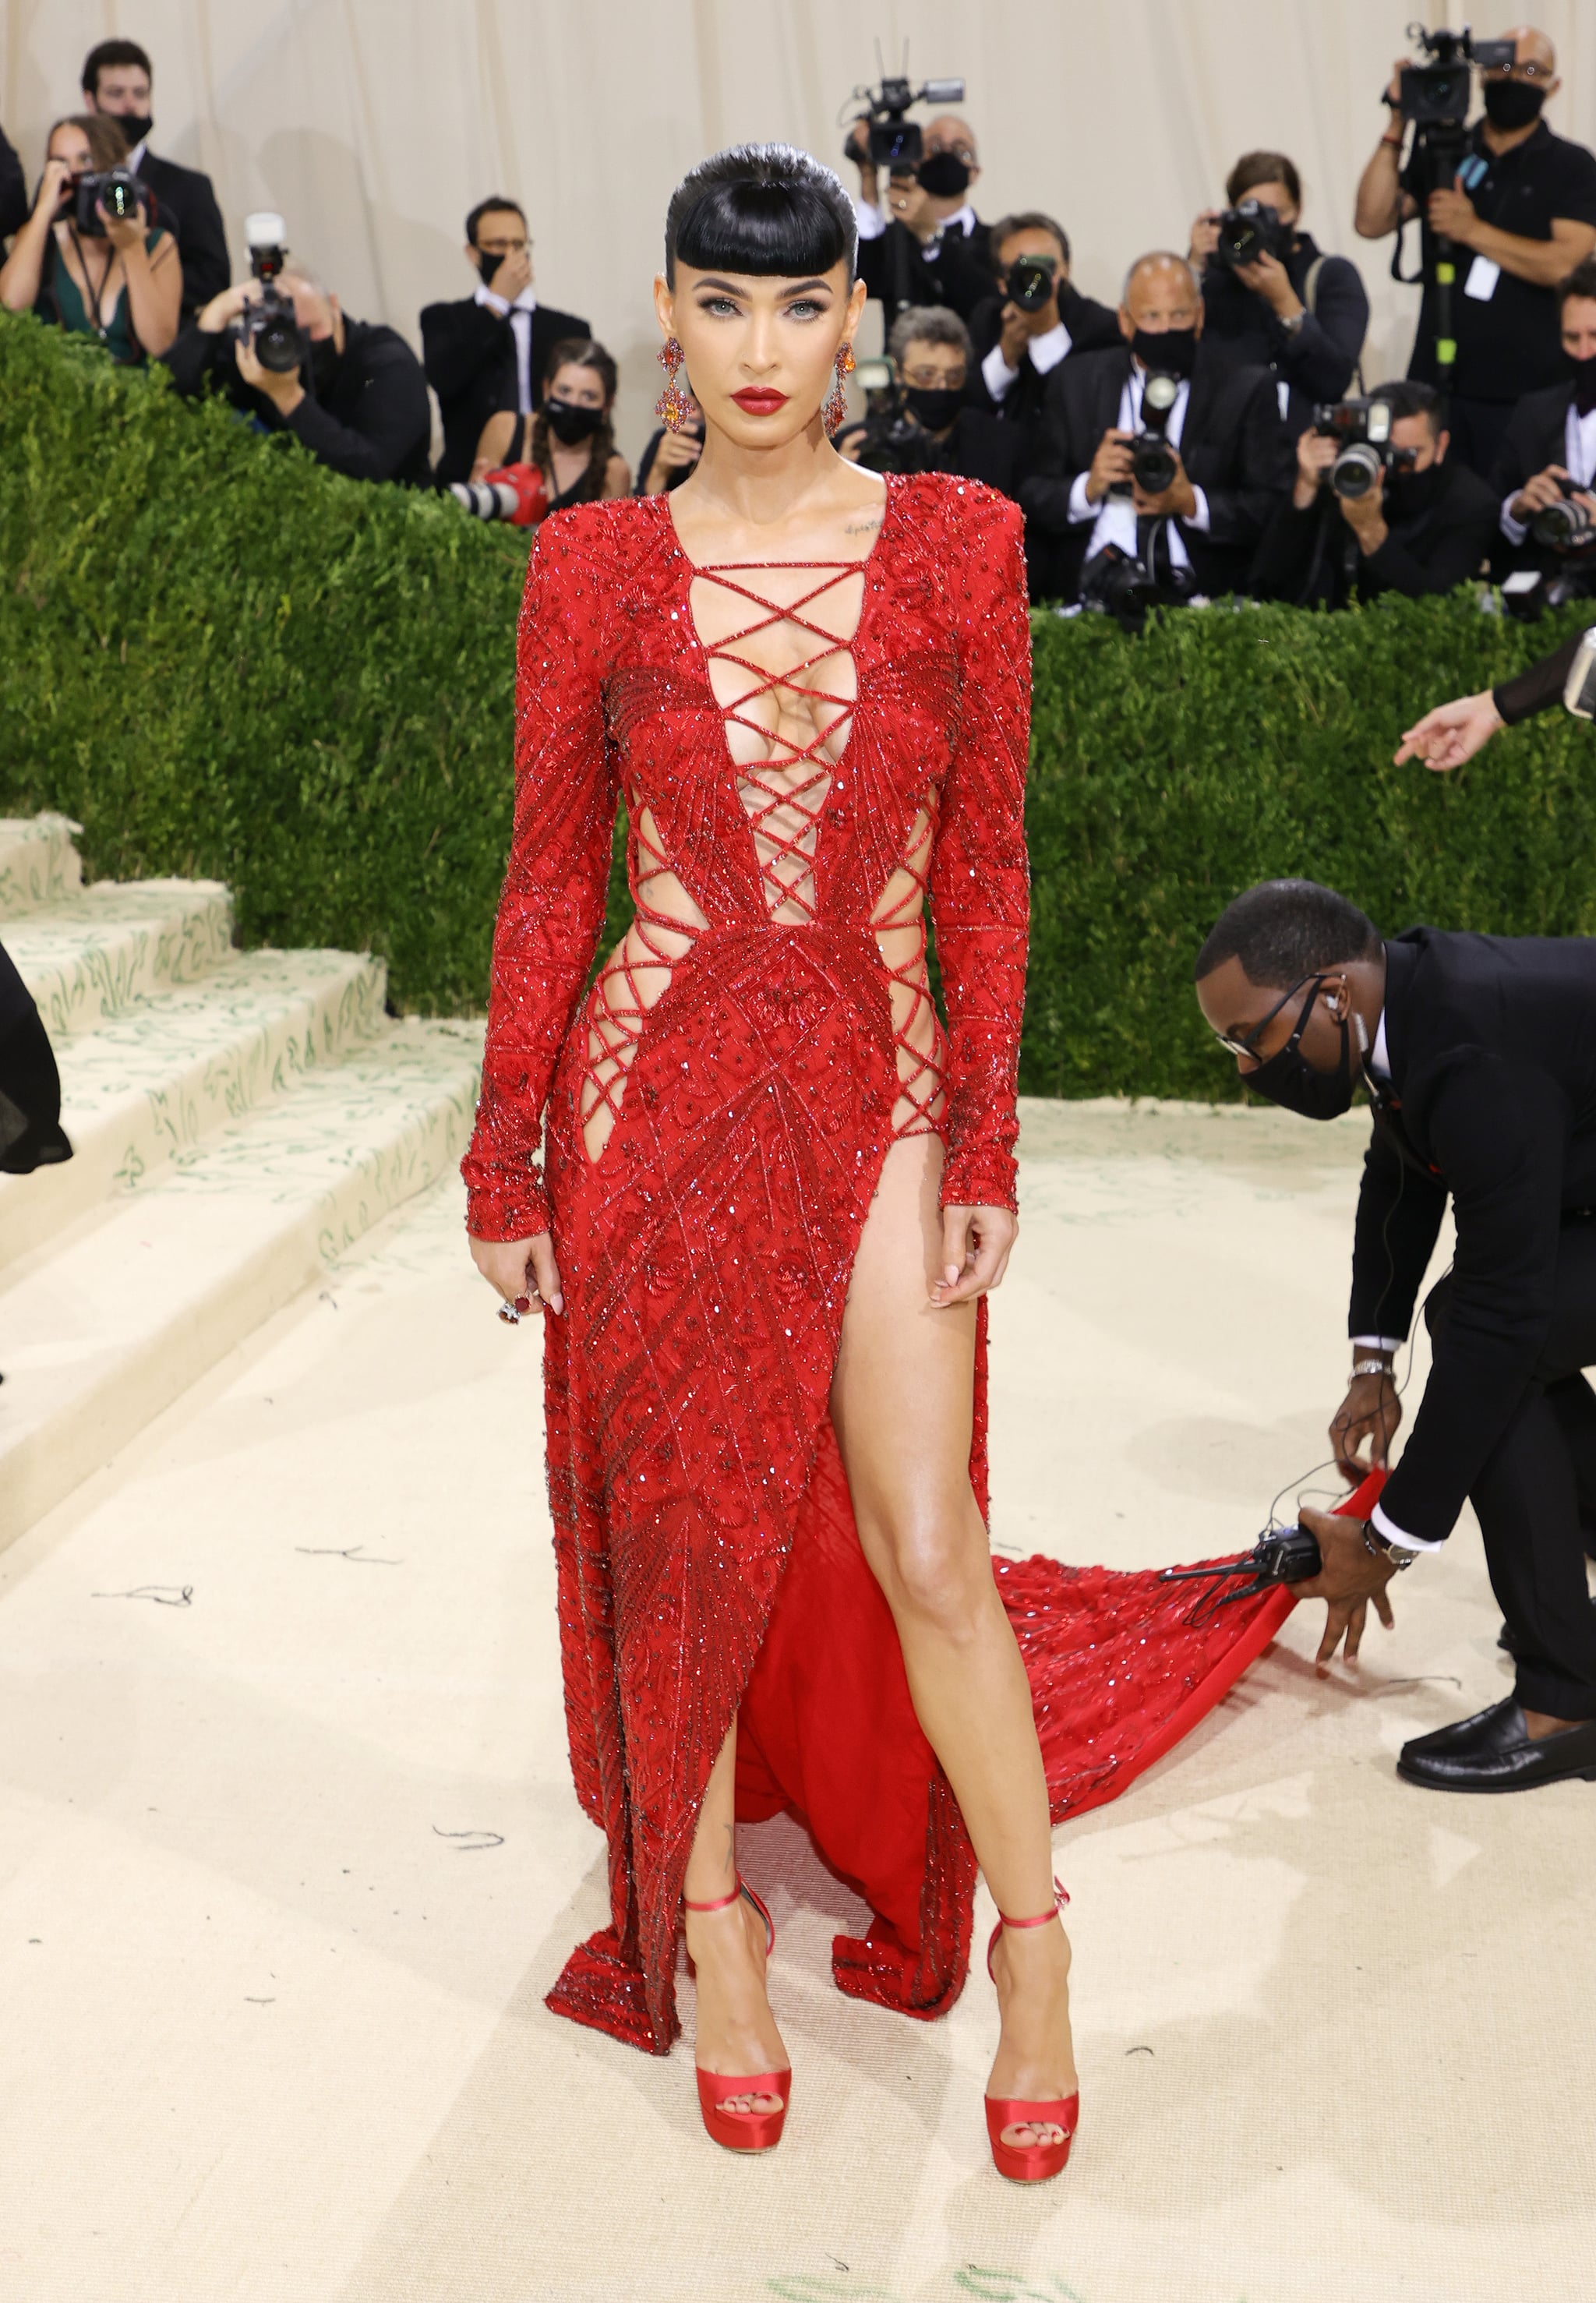 Met Gala 2021 Red Carpet: See Every Celebrity Look, Outfit & Dress Here